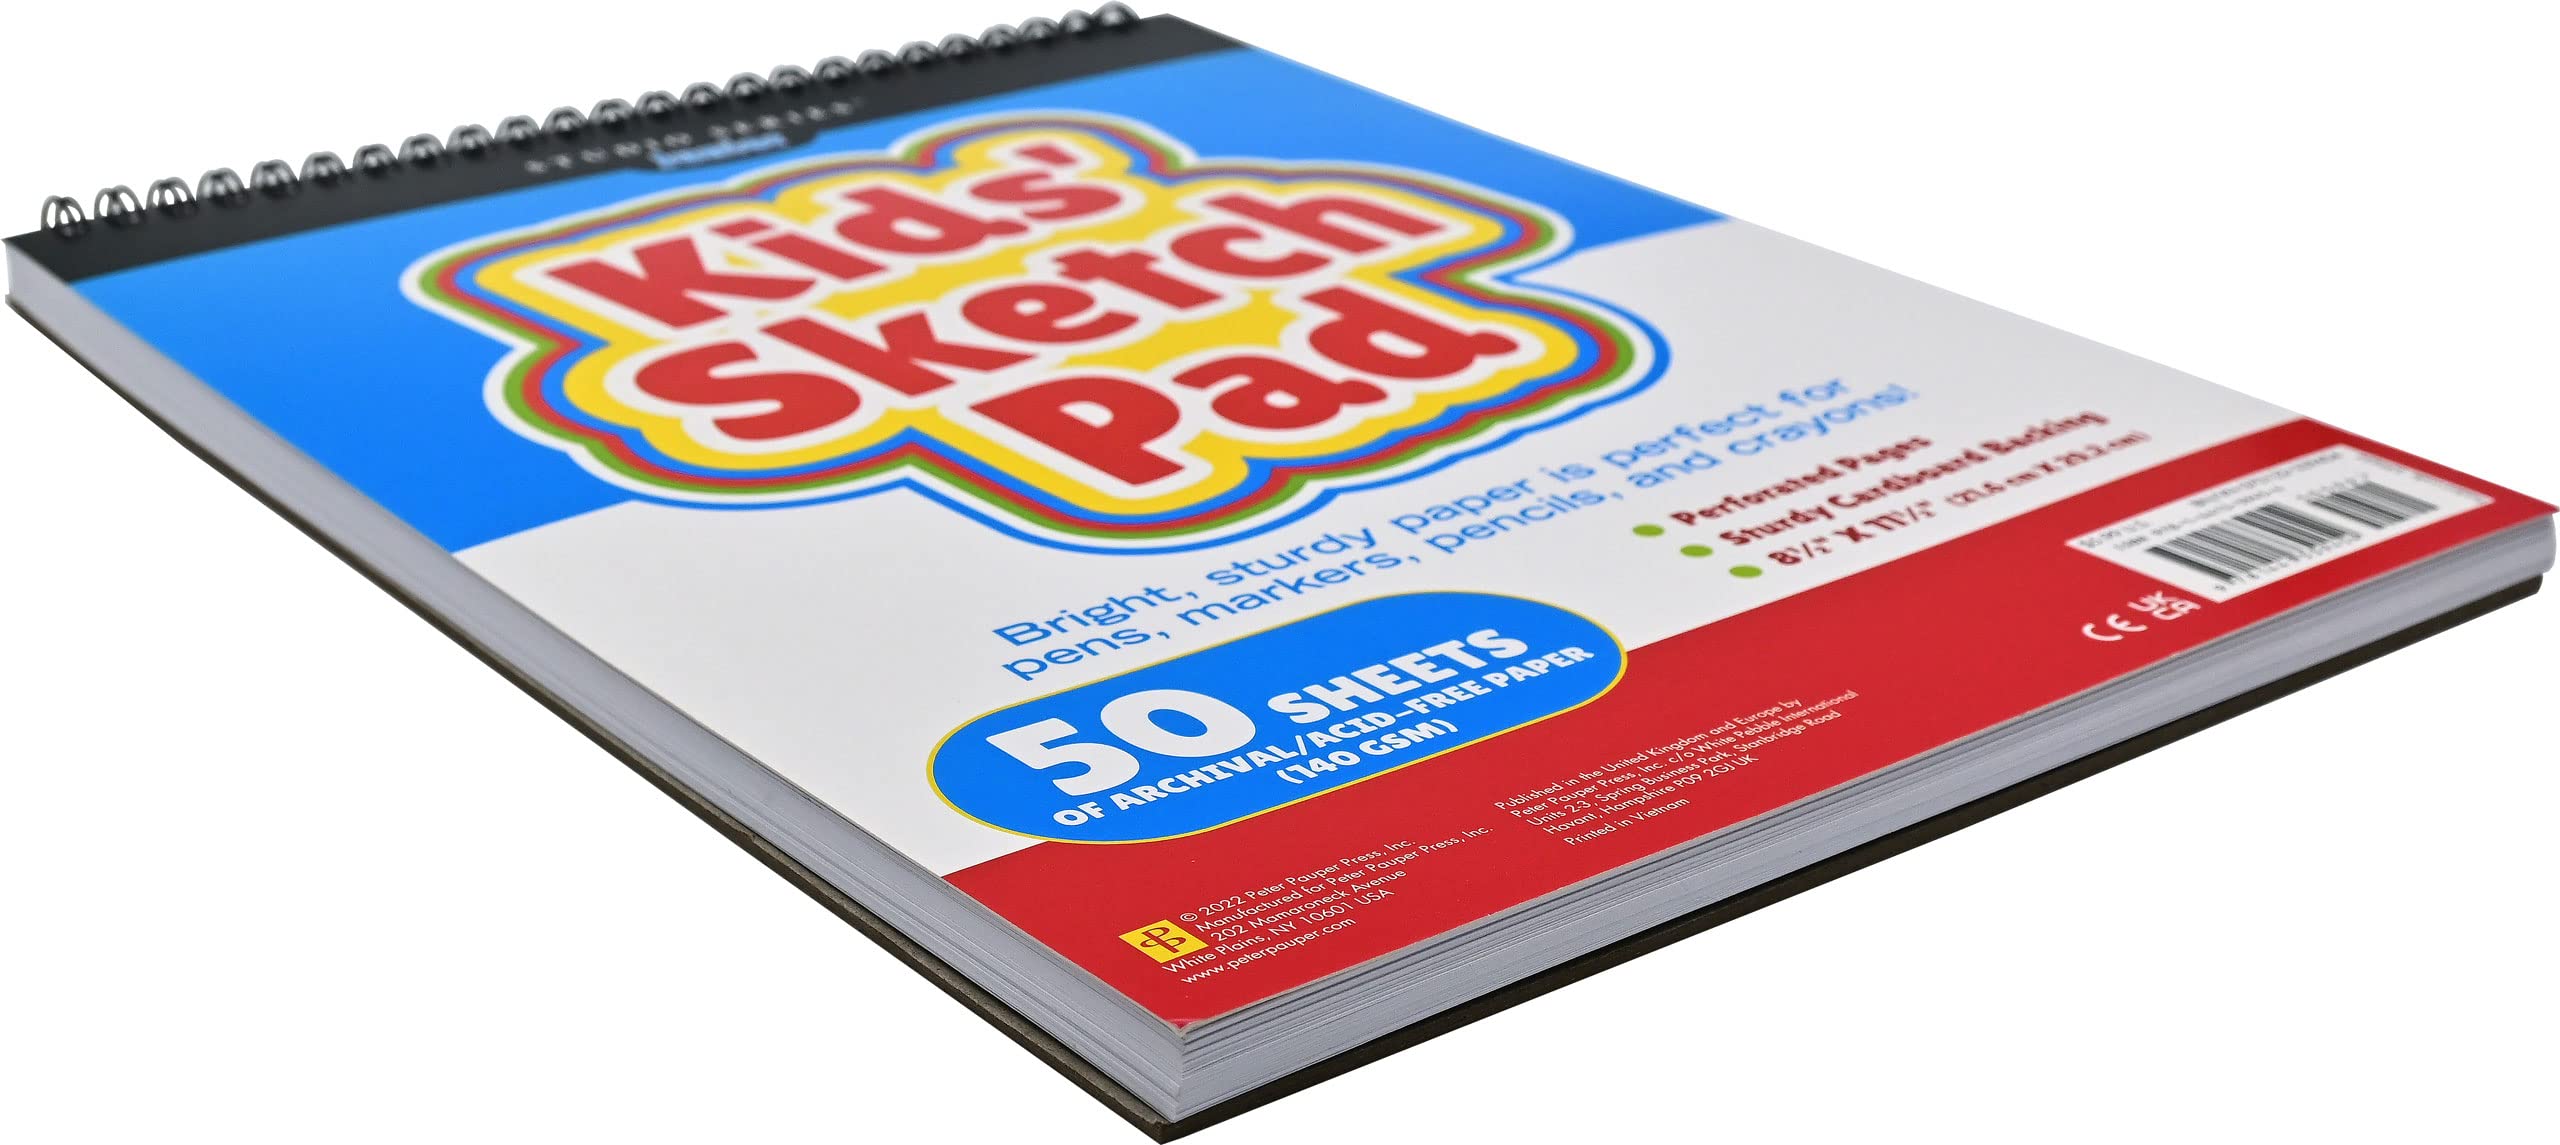 Kids' Sketch Pad (50 perforated sheets of high quality paper. Acid-free)